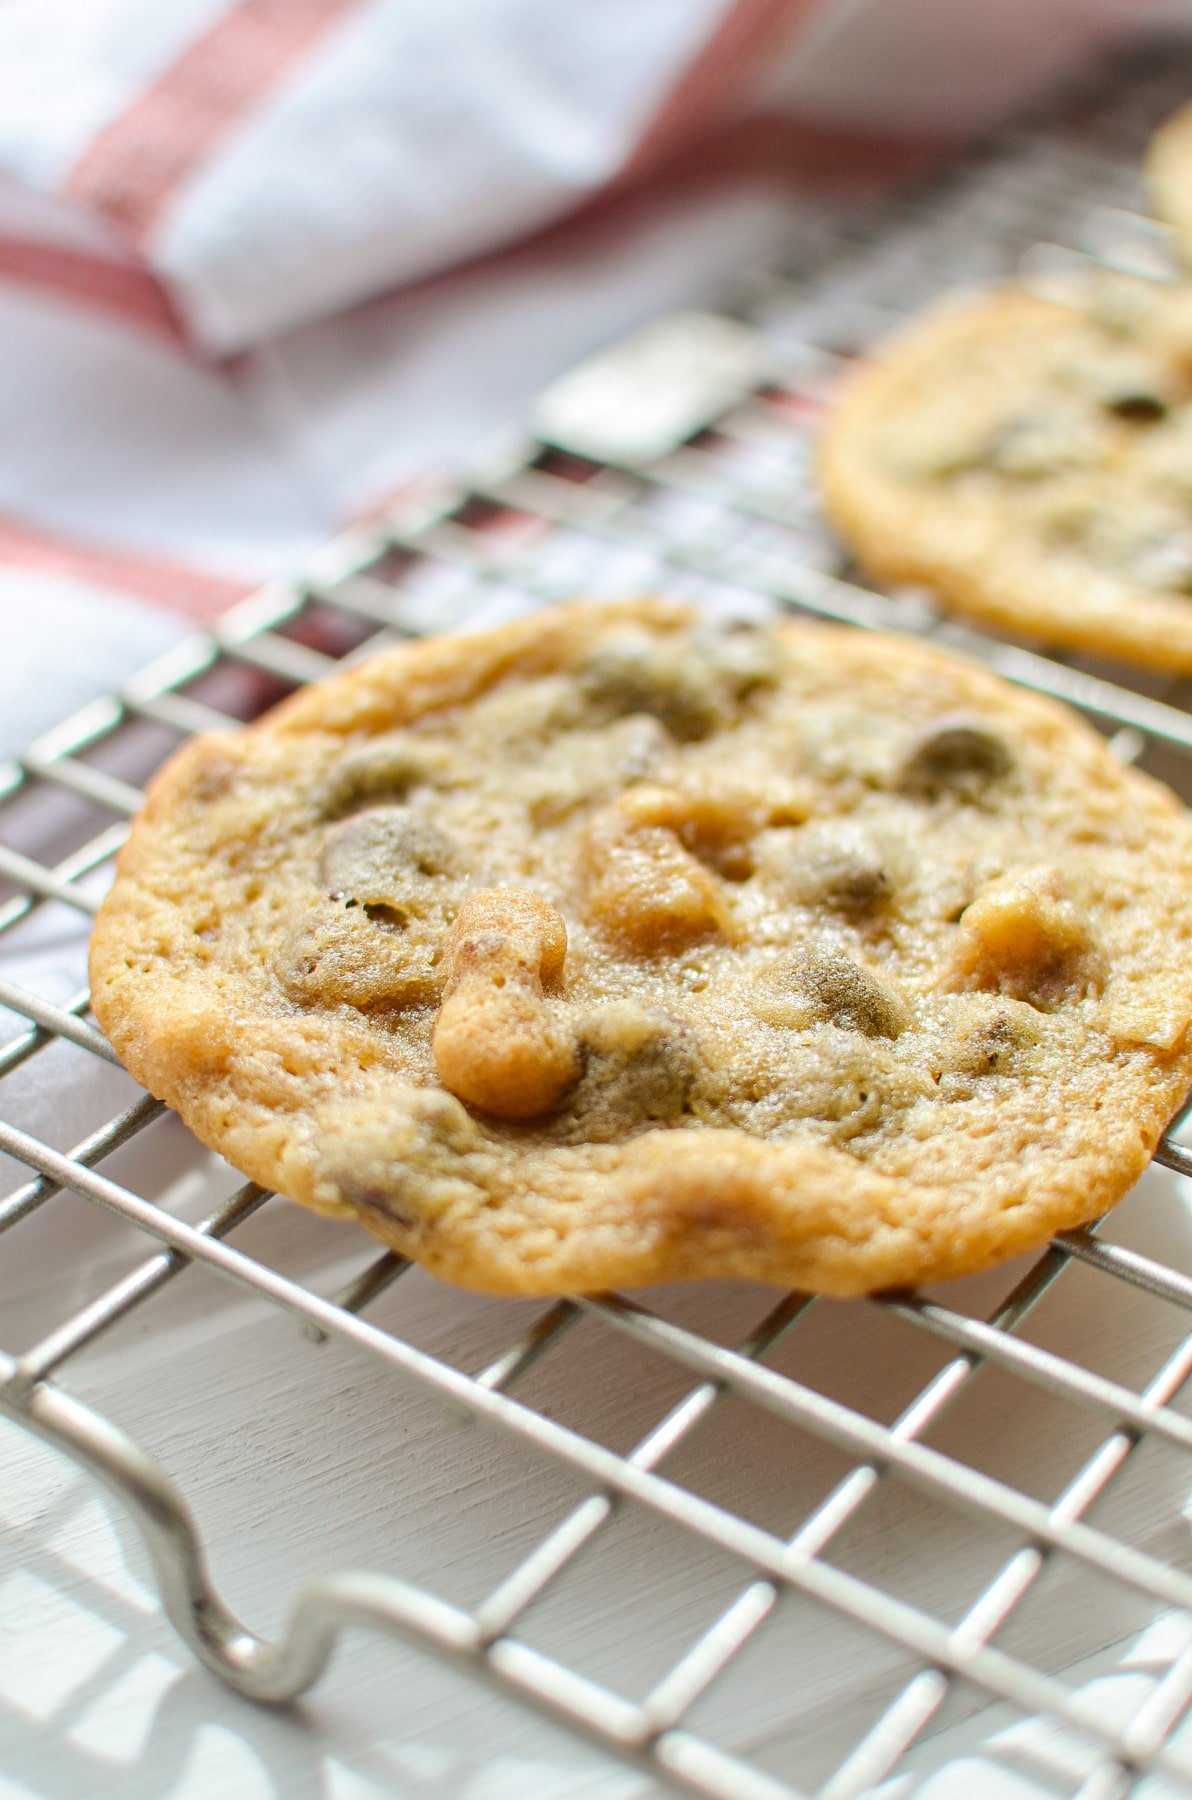 A close up of a cookie on a wire cooling rack.